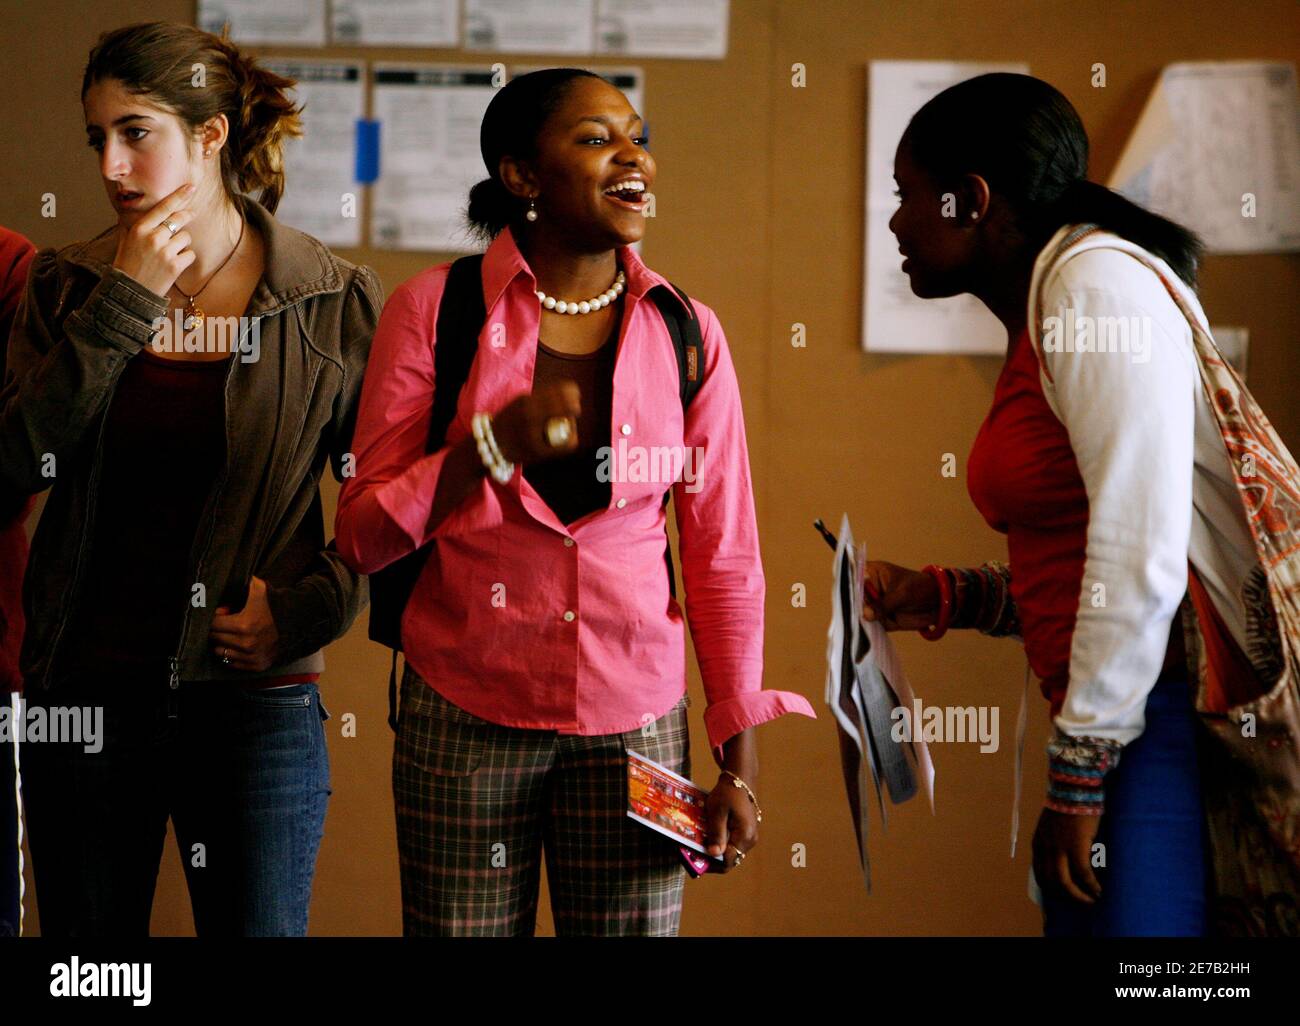 UCLA student Brittney Abraham (R) holds  her ballot as she talks with friend Anniesha Thomas (C) waiting to vote at the Univeristy of California at Los Angeles in a dormitory on campus in Los Angeles November 4, 2008. REUTERS/Fred Prouser          (UNITED STATES) US PRESIDENTIAL ELECTION CAMPAIGN 2008 (USA) Stock Photo